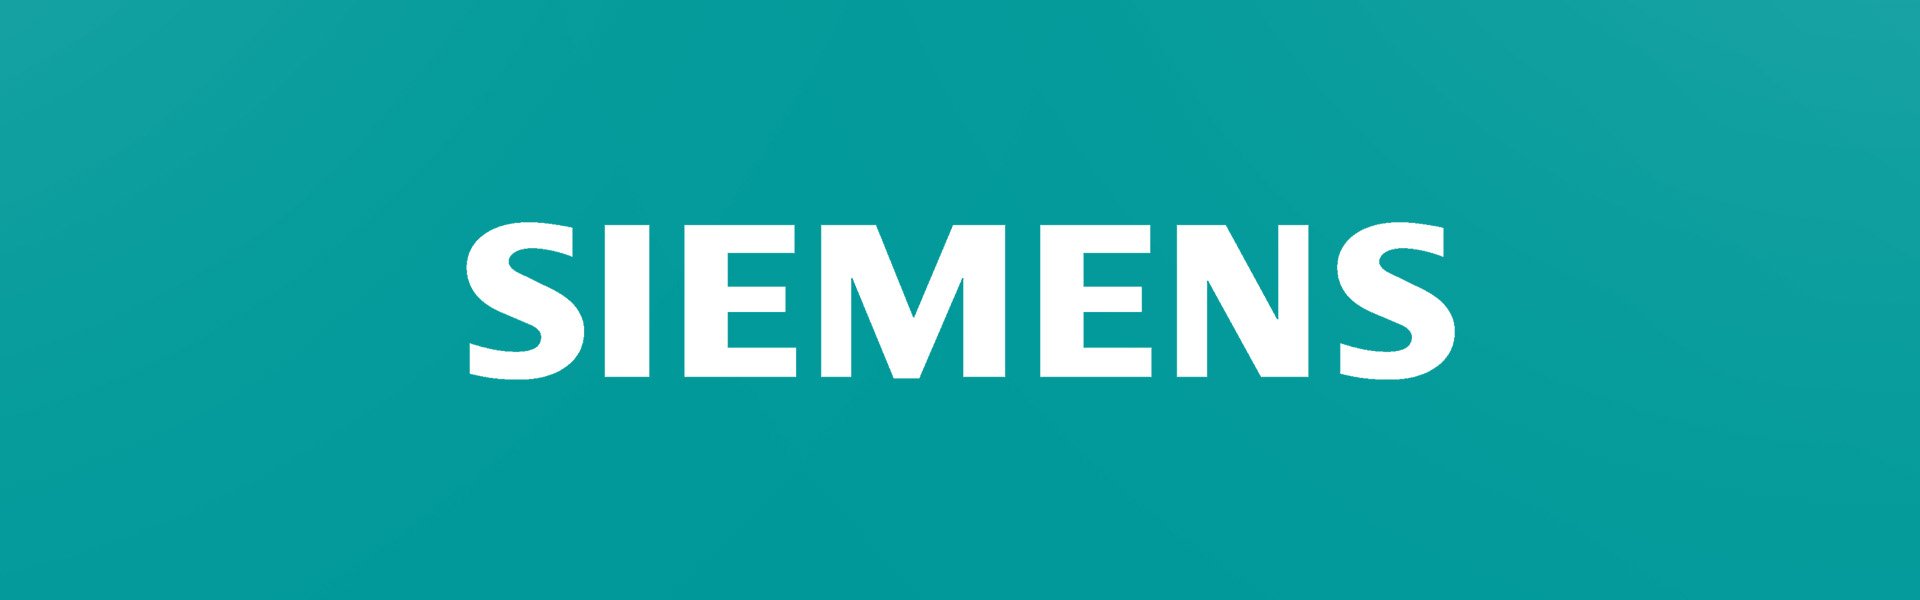 Is Siemens A Good Company To Work For